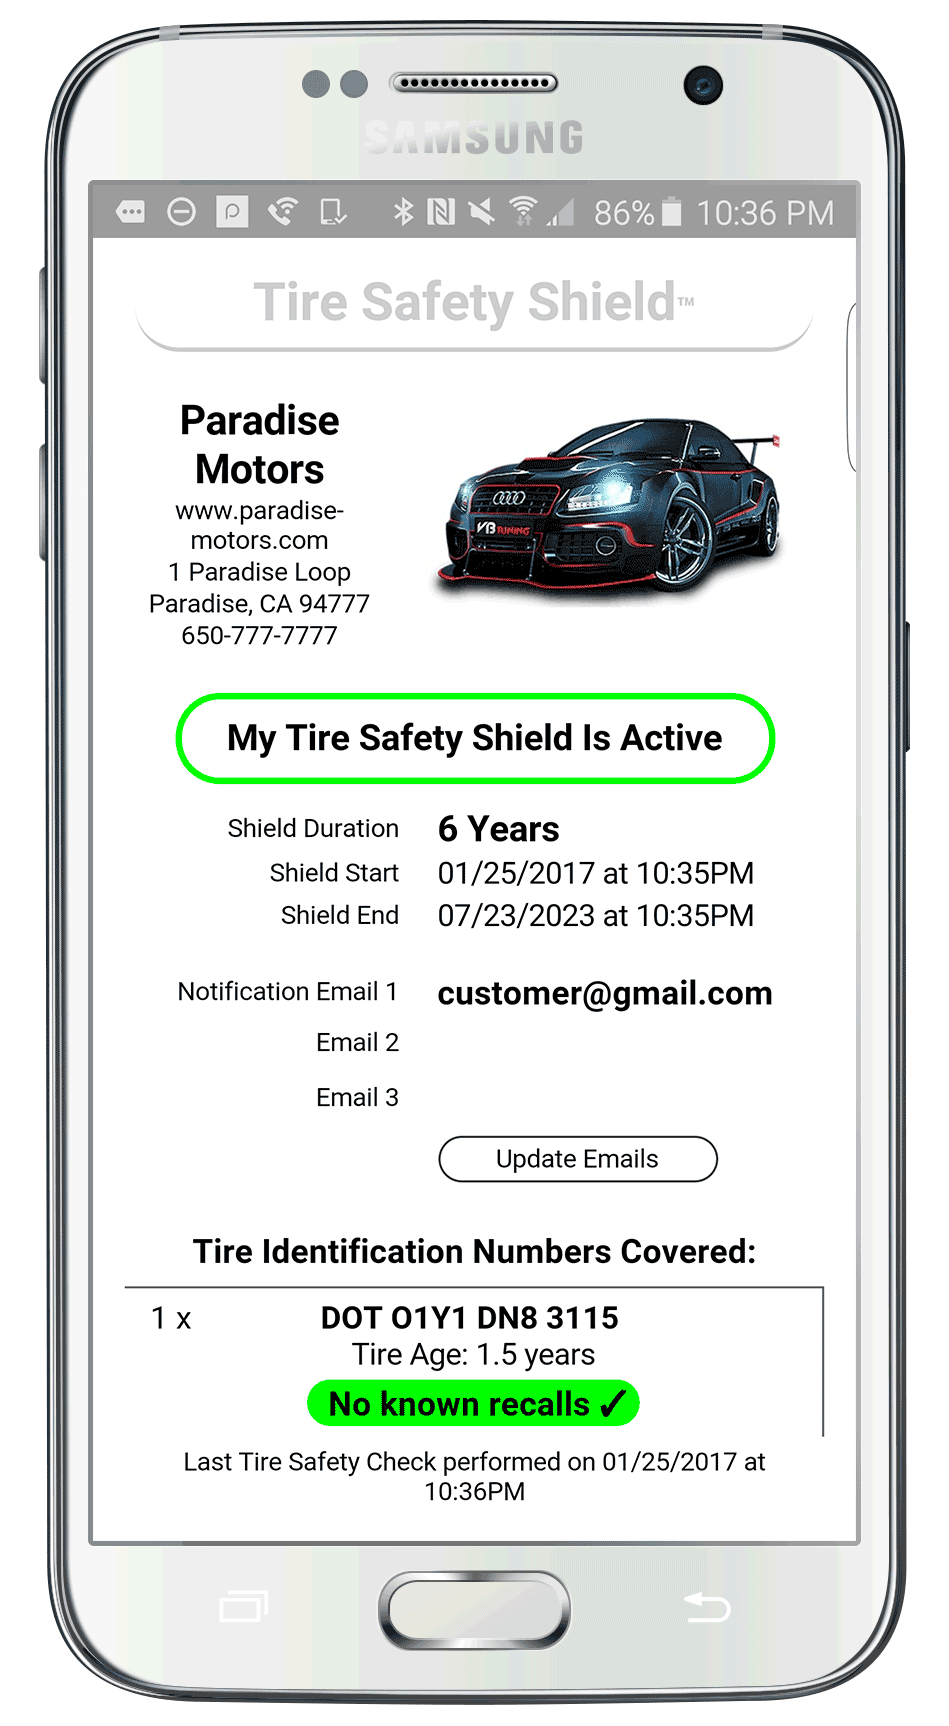 Tire Safety Shield Report